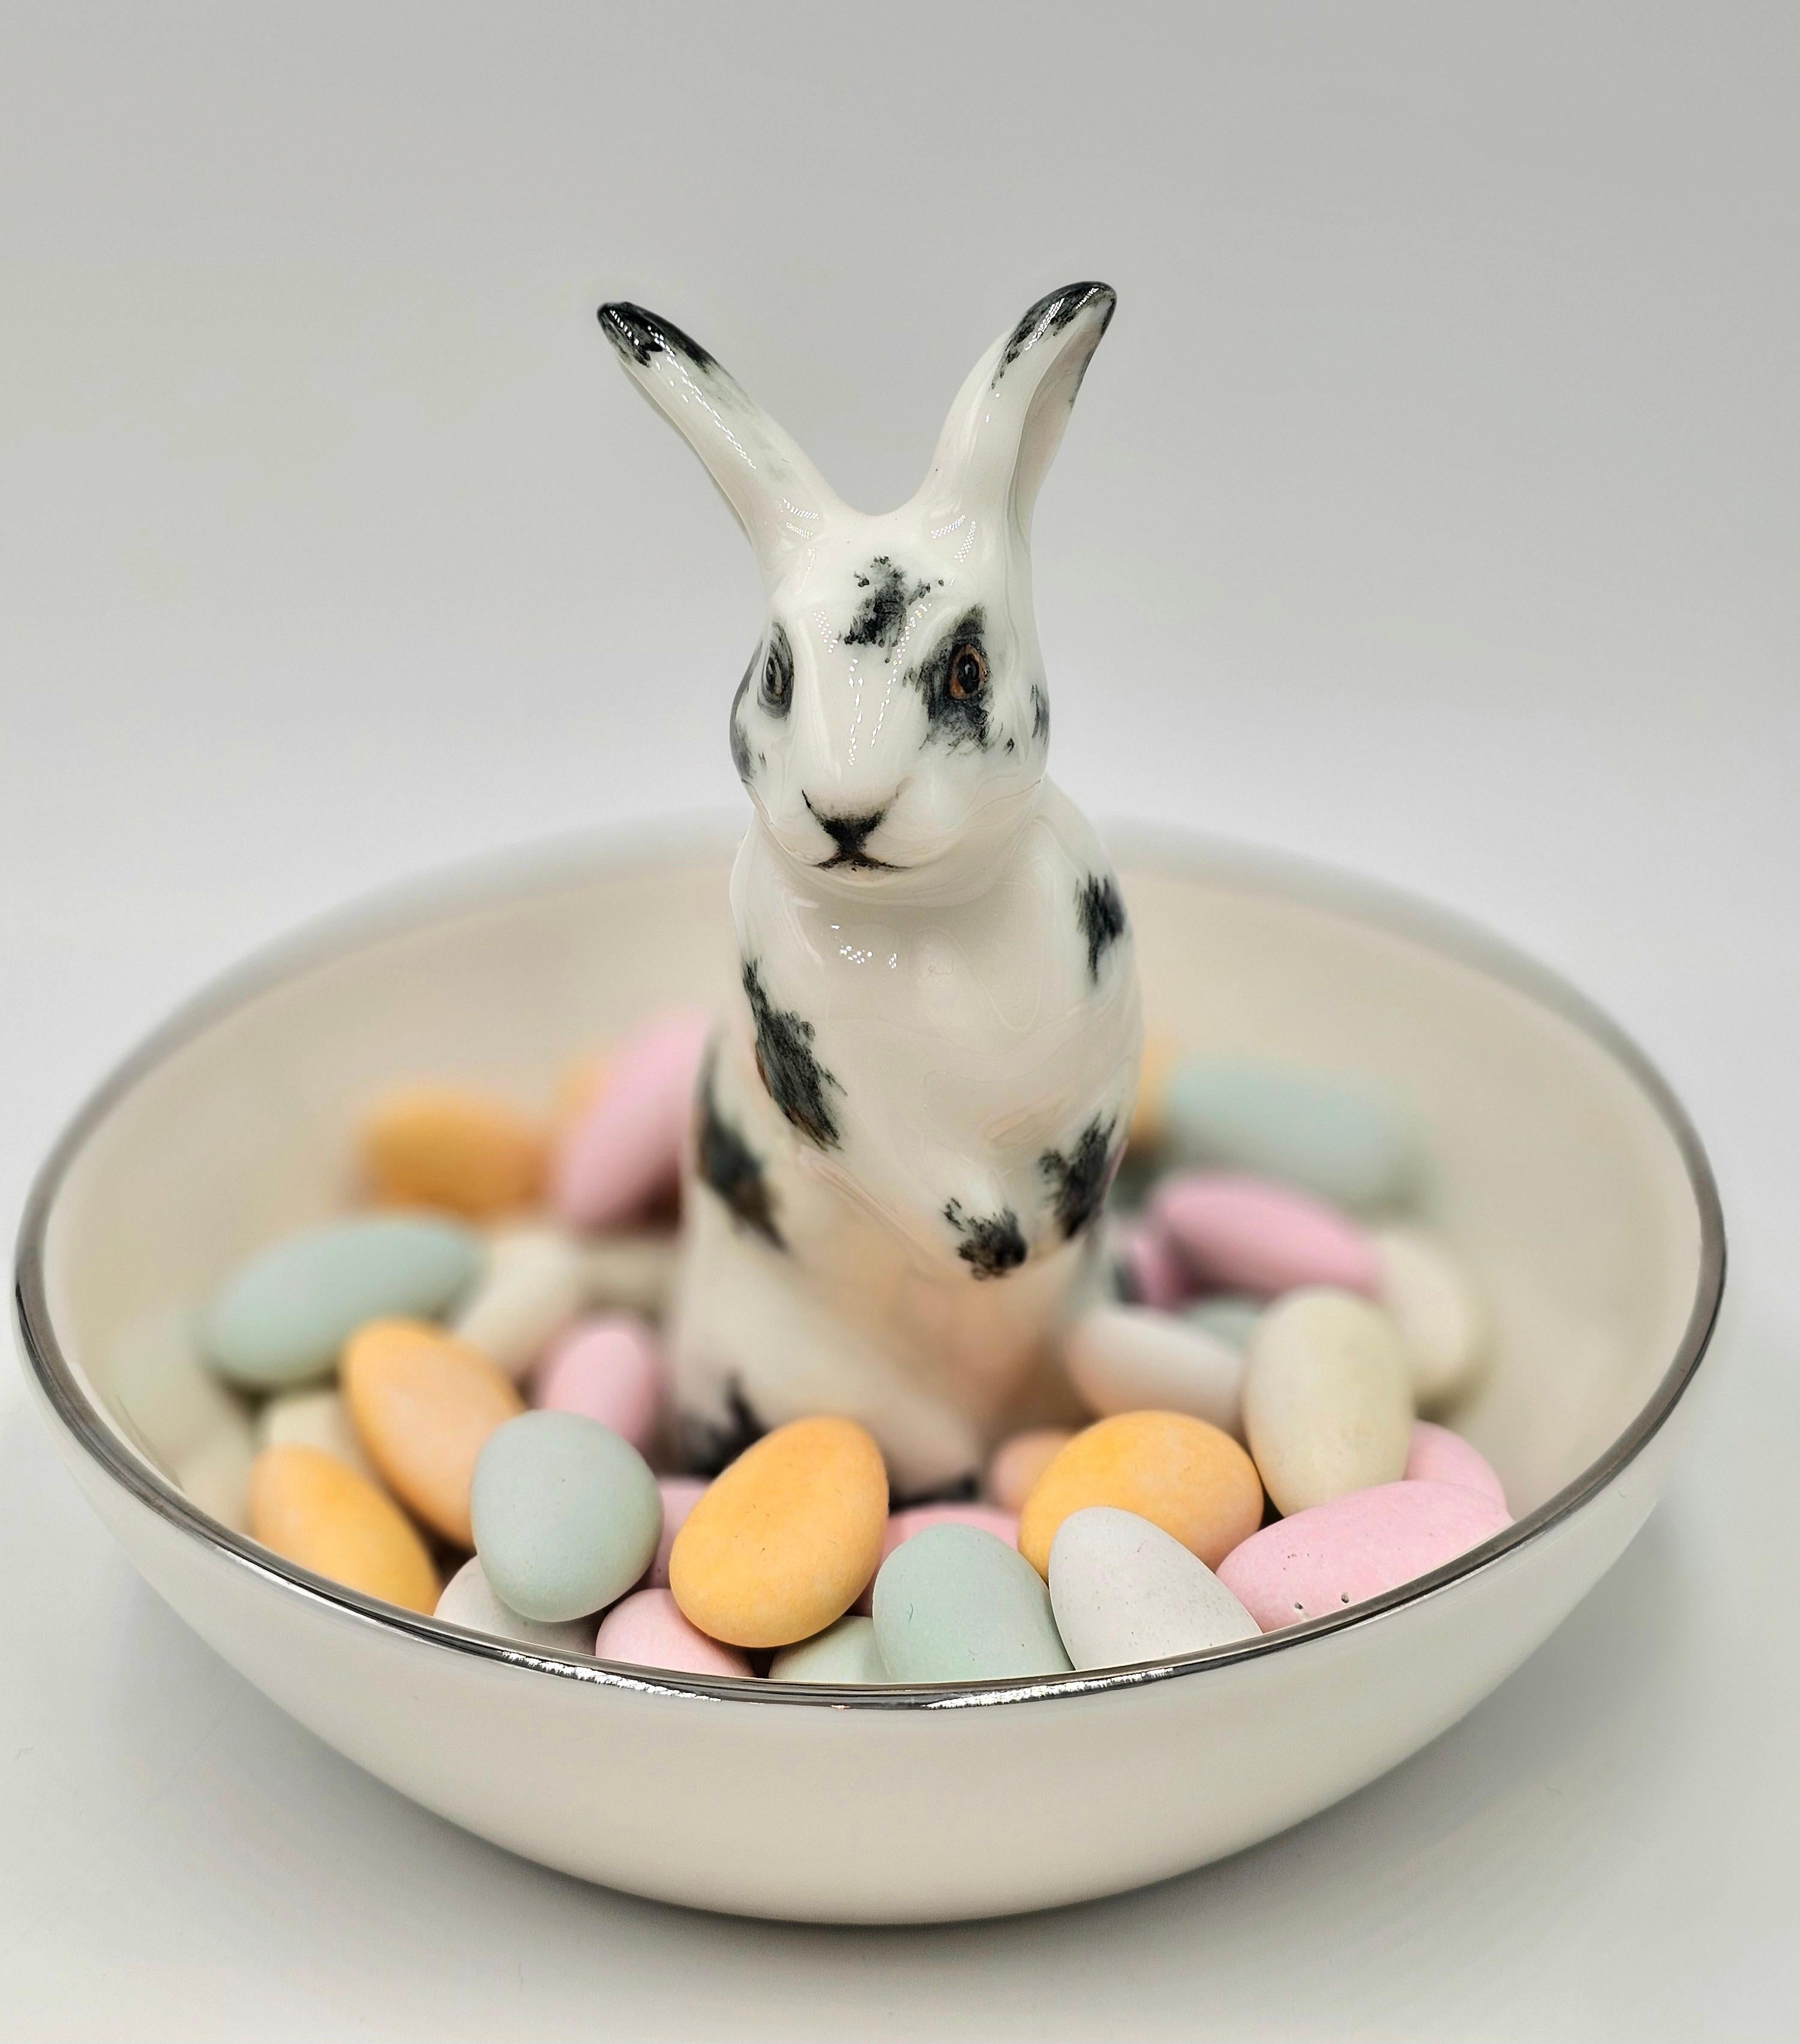 Completely handmade porcelain bowl with a hands-free naturalistic painted hare figure with black spots. The Easter bunny is sitting in the middle of the bowl for decorating nuts or sweets around. Rimmed with a fine platinum line. Completely handmade